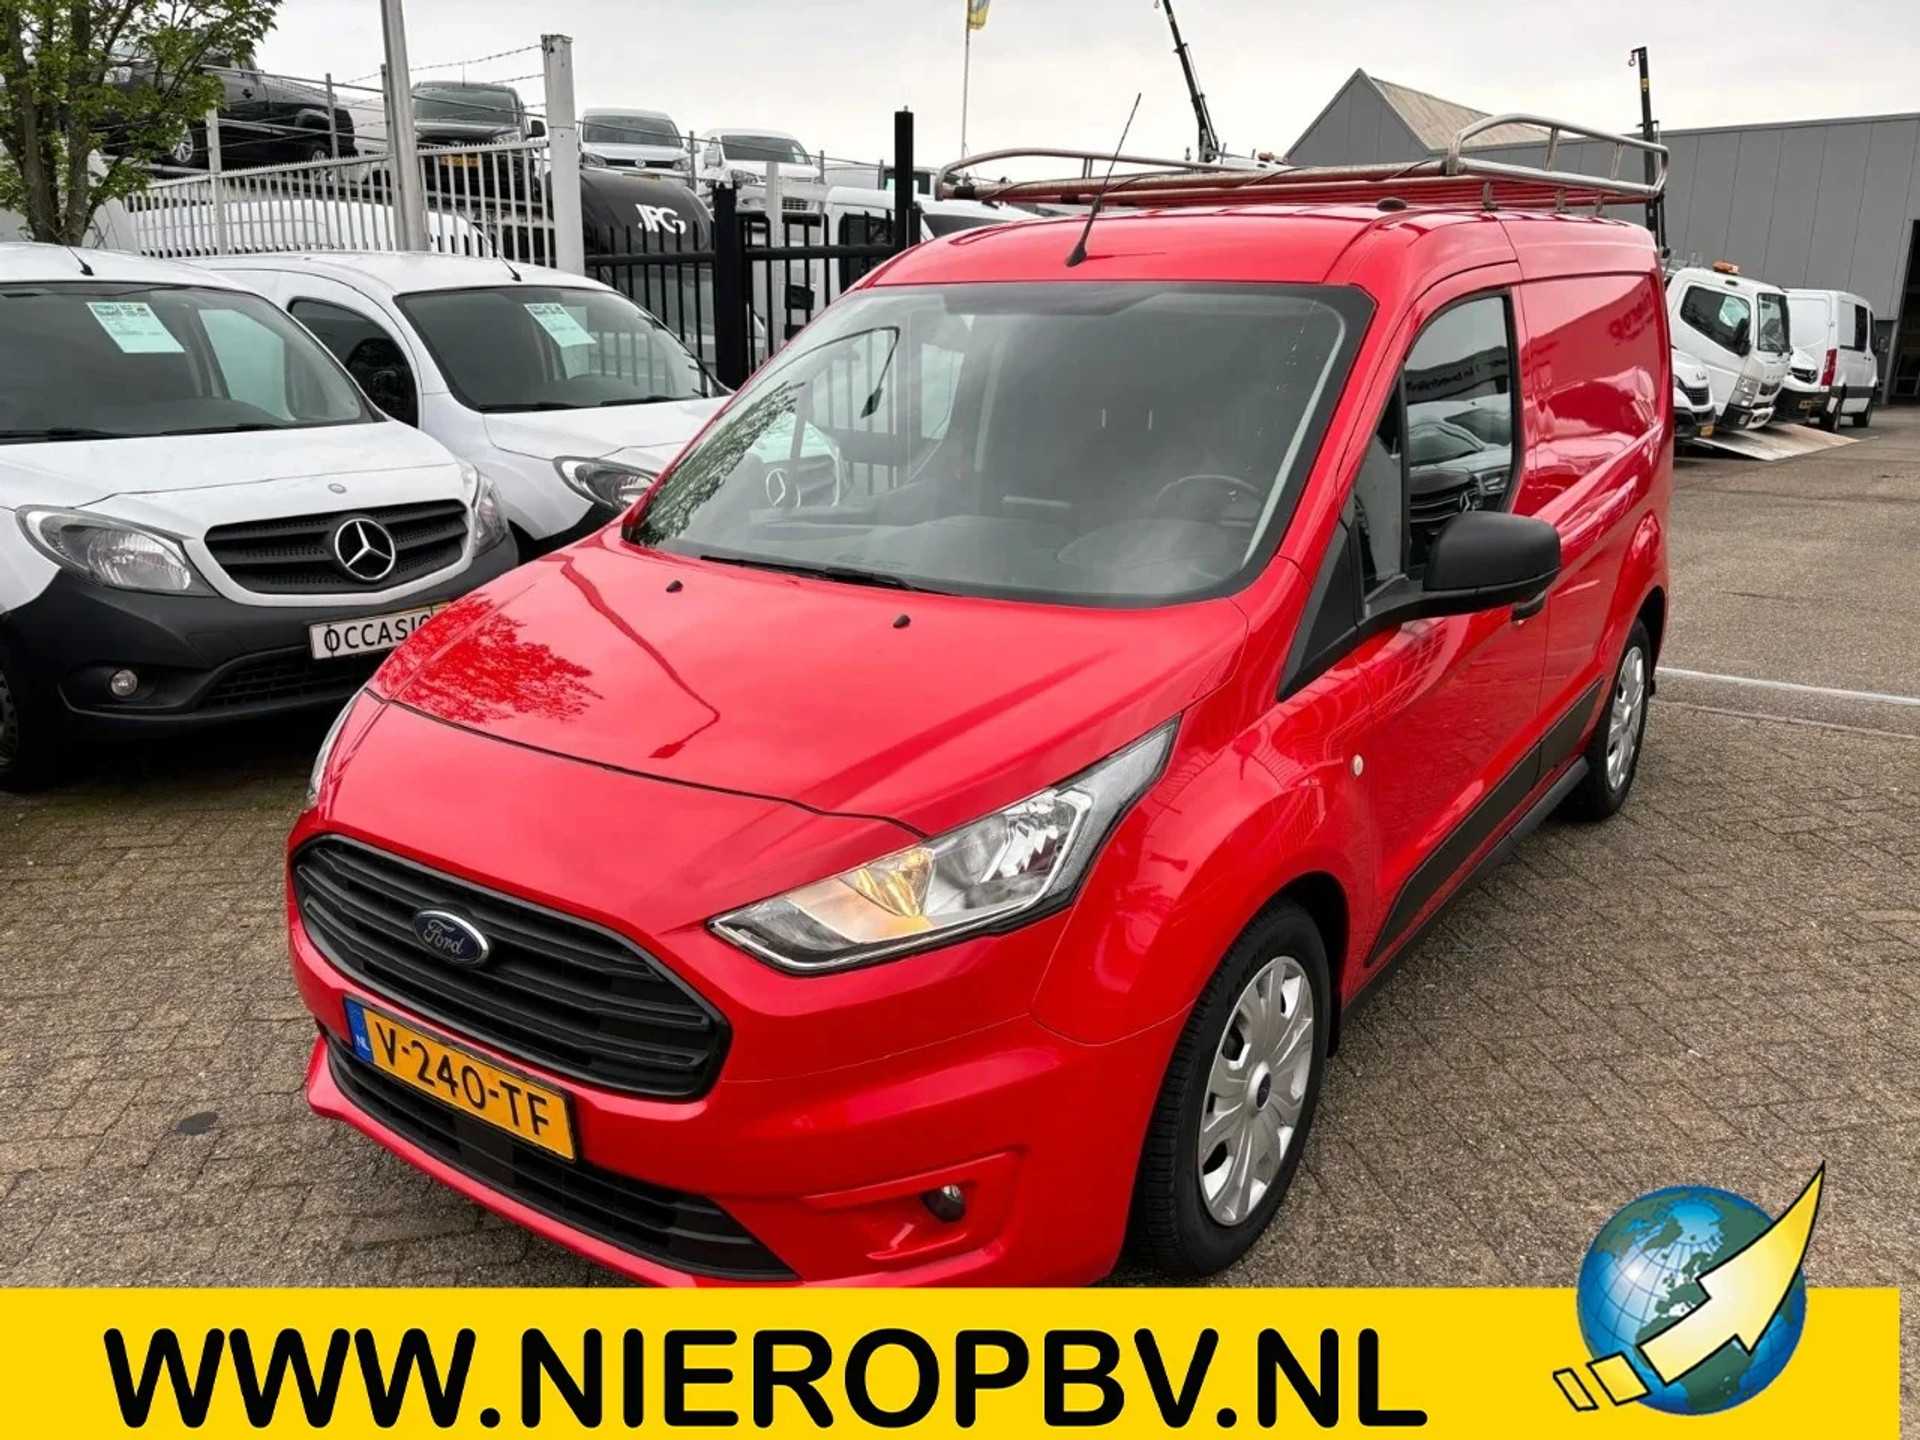 Ford Transit Connect Airco Navi Cruisecontrol Trekhaak